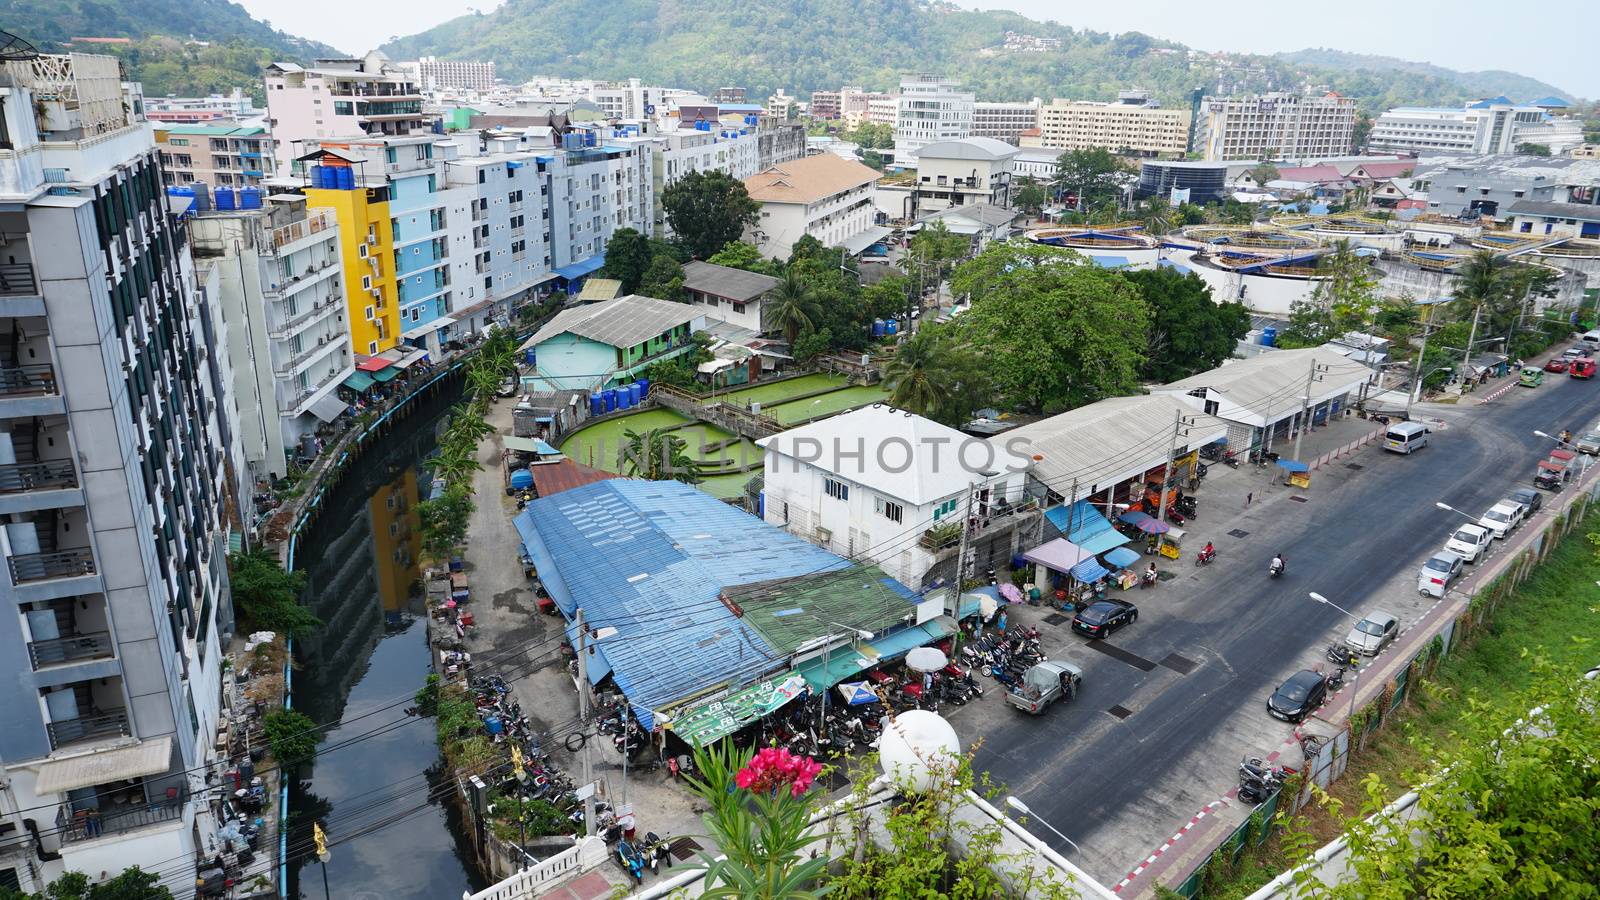 Drone view of the city of Patong, Phuket island. Houses of different heights stand on the beach. Green hills of the island. On the roof of houses pools, people swim. On the road go scooters and cars.